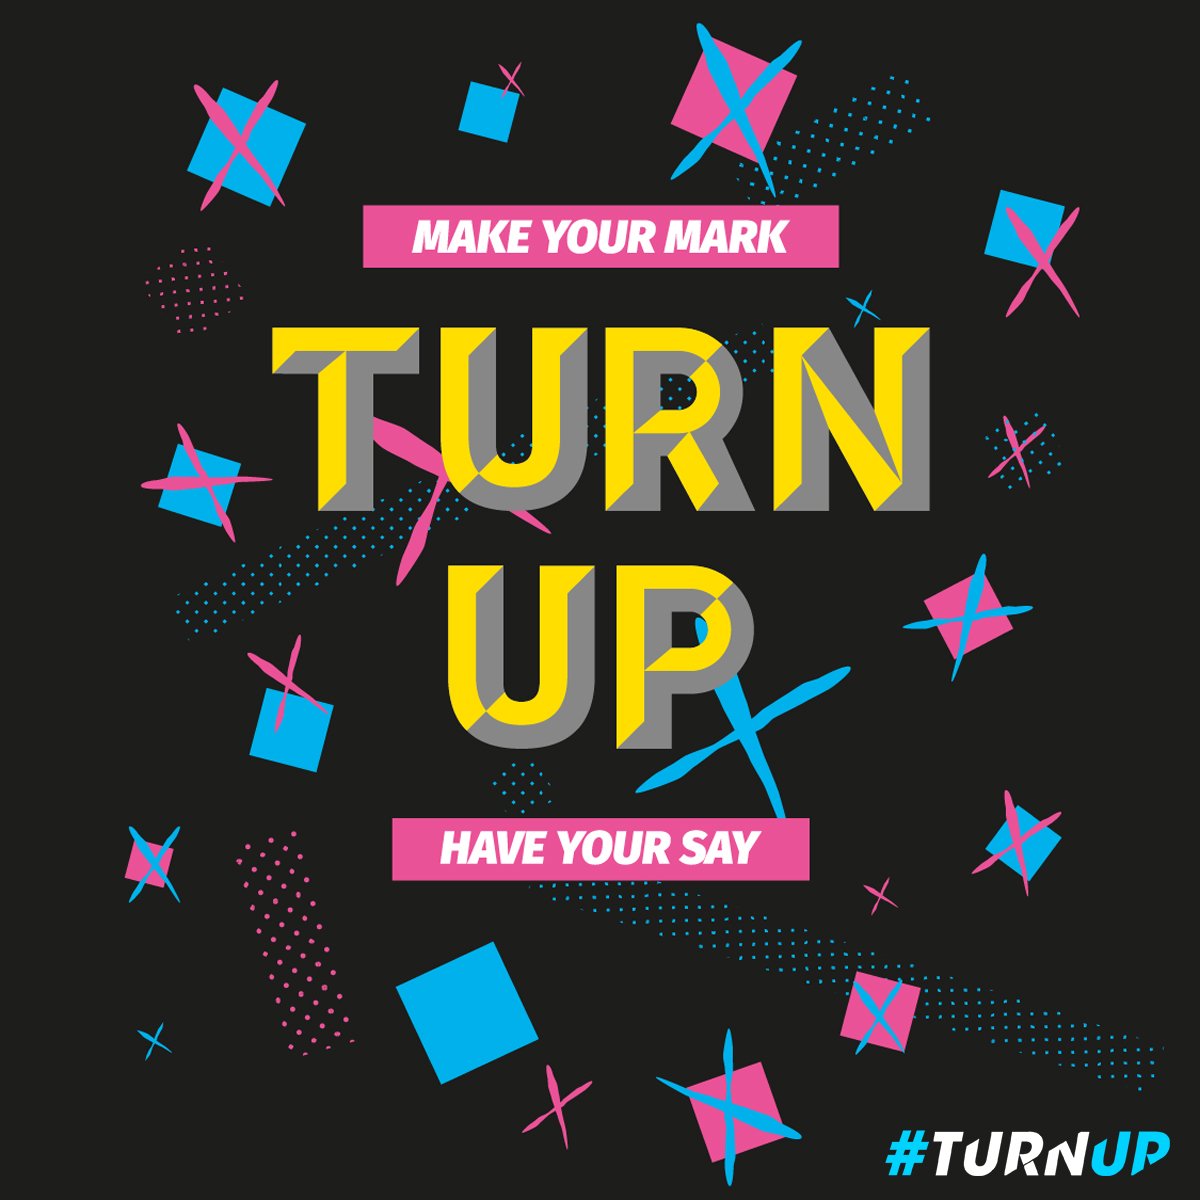 Today is the day. Your opportunity to #TakePower is in front of you. Use @democlub 🗳️ WhereDoIVote.co.uk & 🗳️ WhoCanIVoteFor.co.uk Don't get caught short this May 3rd. #TurnUP #LocalElections2018 #PollingDay ✊🏿✊🏻✊🏾✊🏼✊